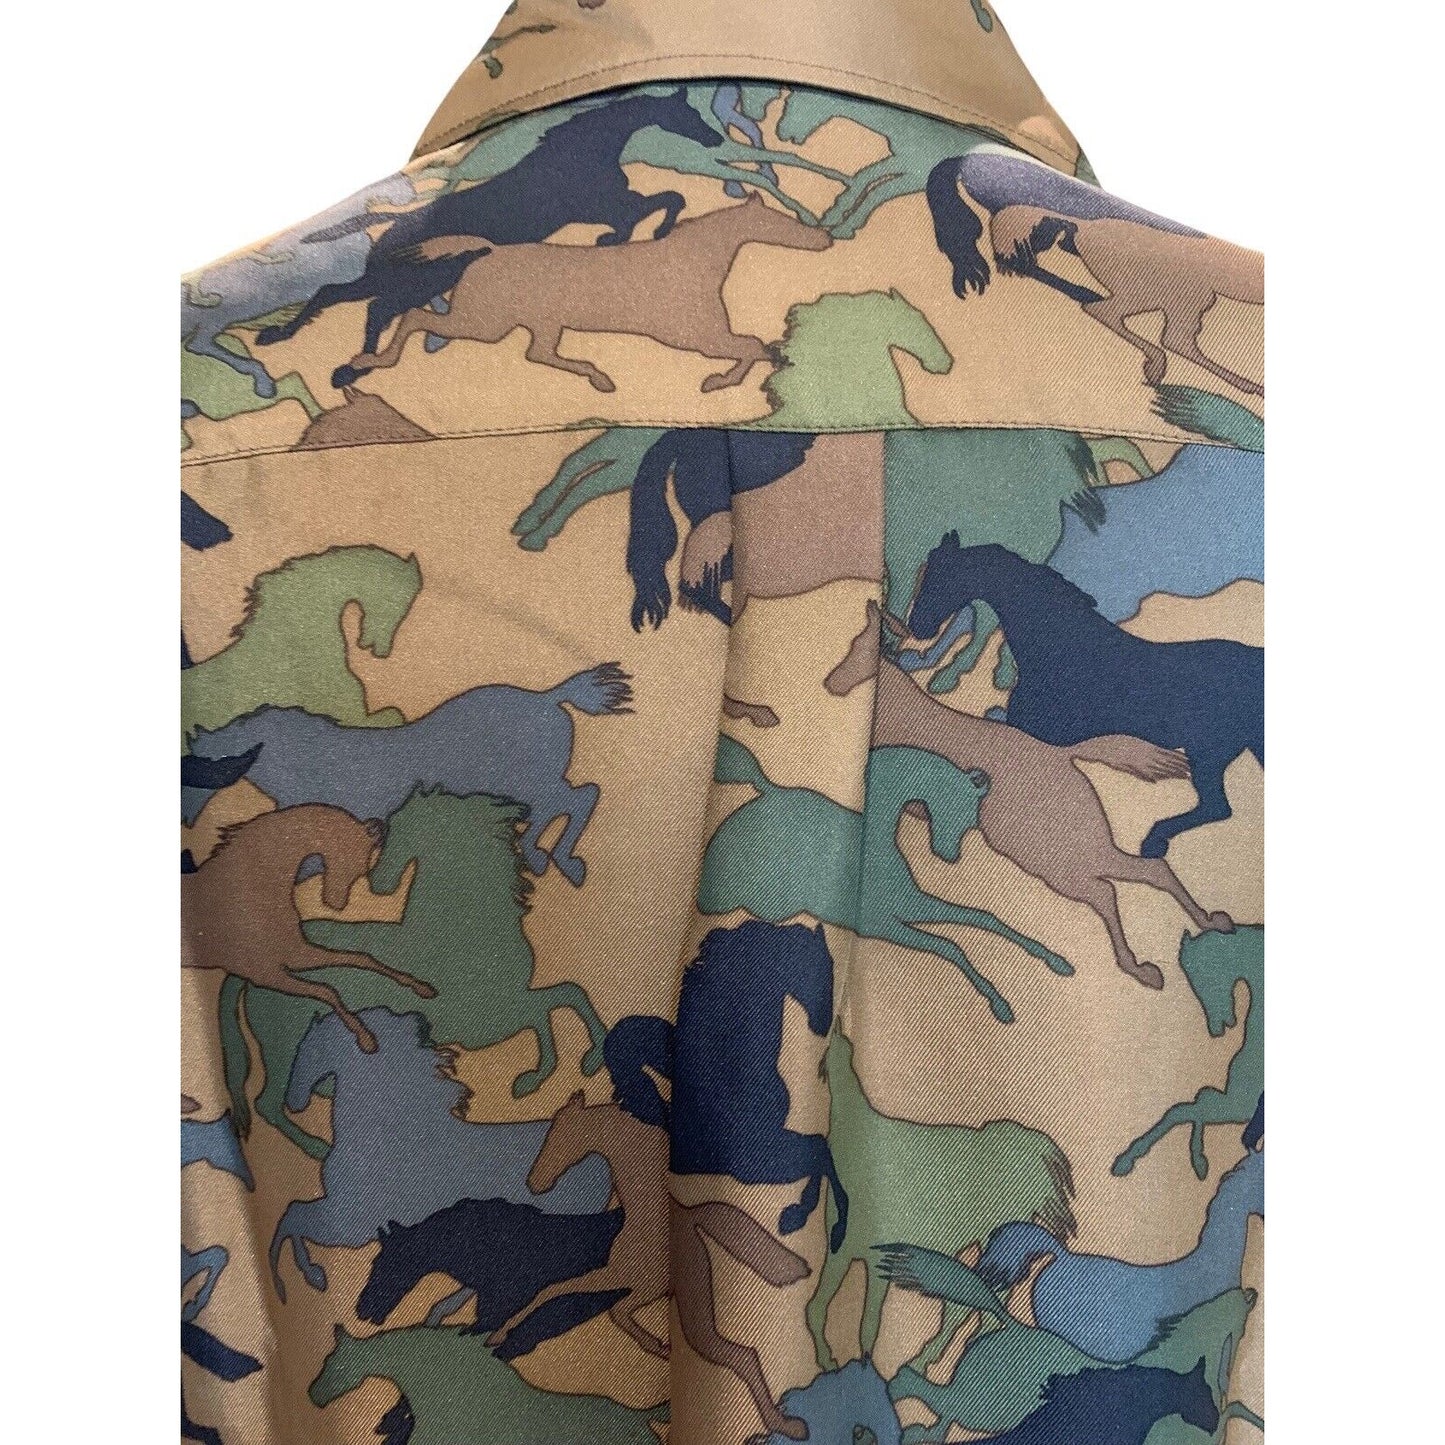 Hermes Women's Button Front Shirt with Camouflage Horse Print